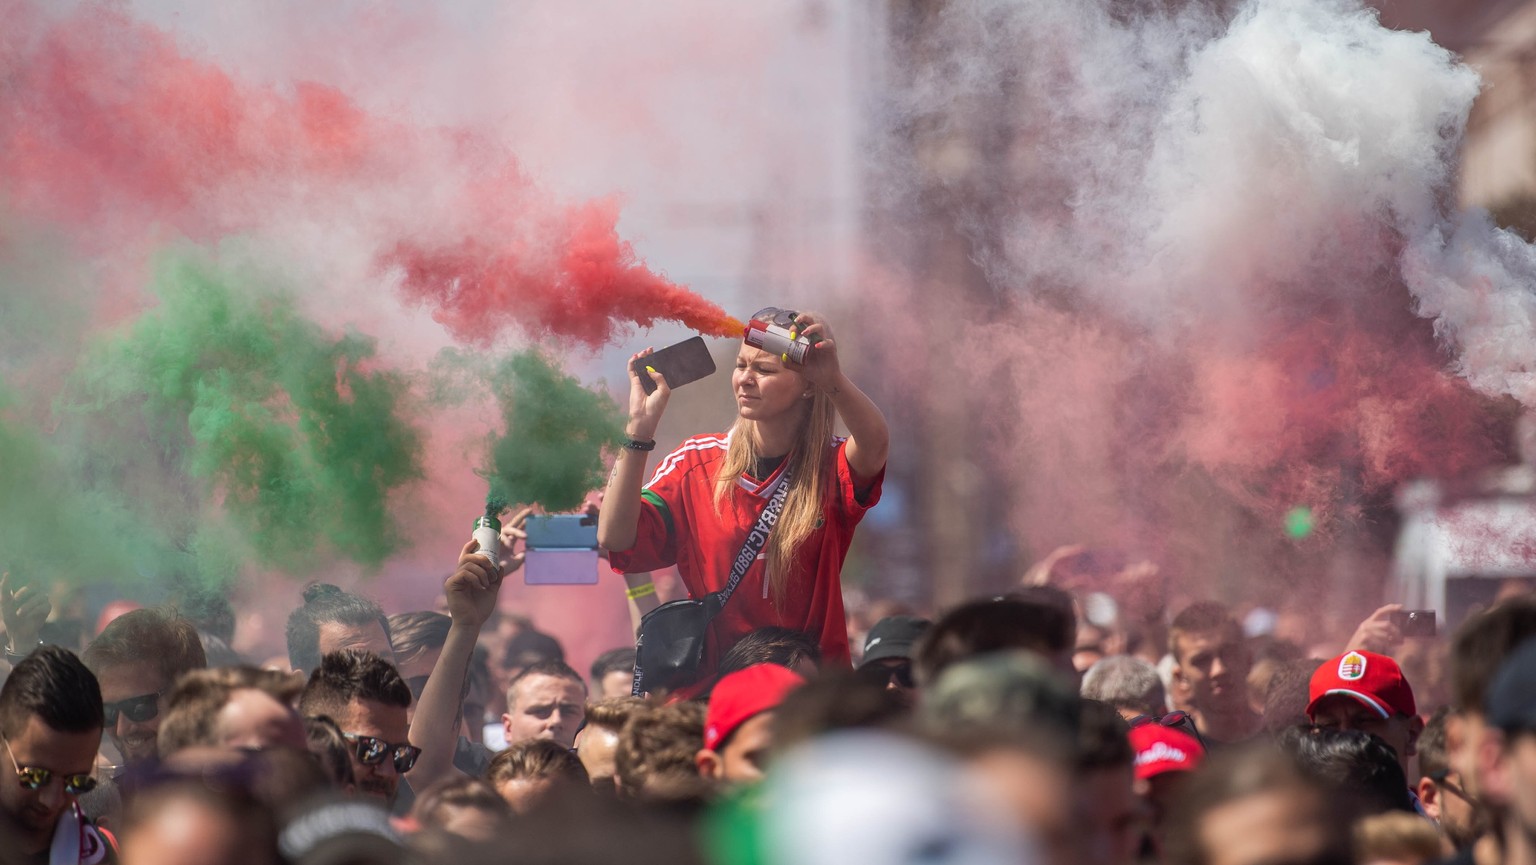 Hungarian fans march towards the Puskas Arena in Budapest, Hungary, Tuesday, June 15, 2021 hours before Hungary will face Portugal in their UEFA EURO 2020 group F preliminary round soccer match. (Zolt ...